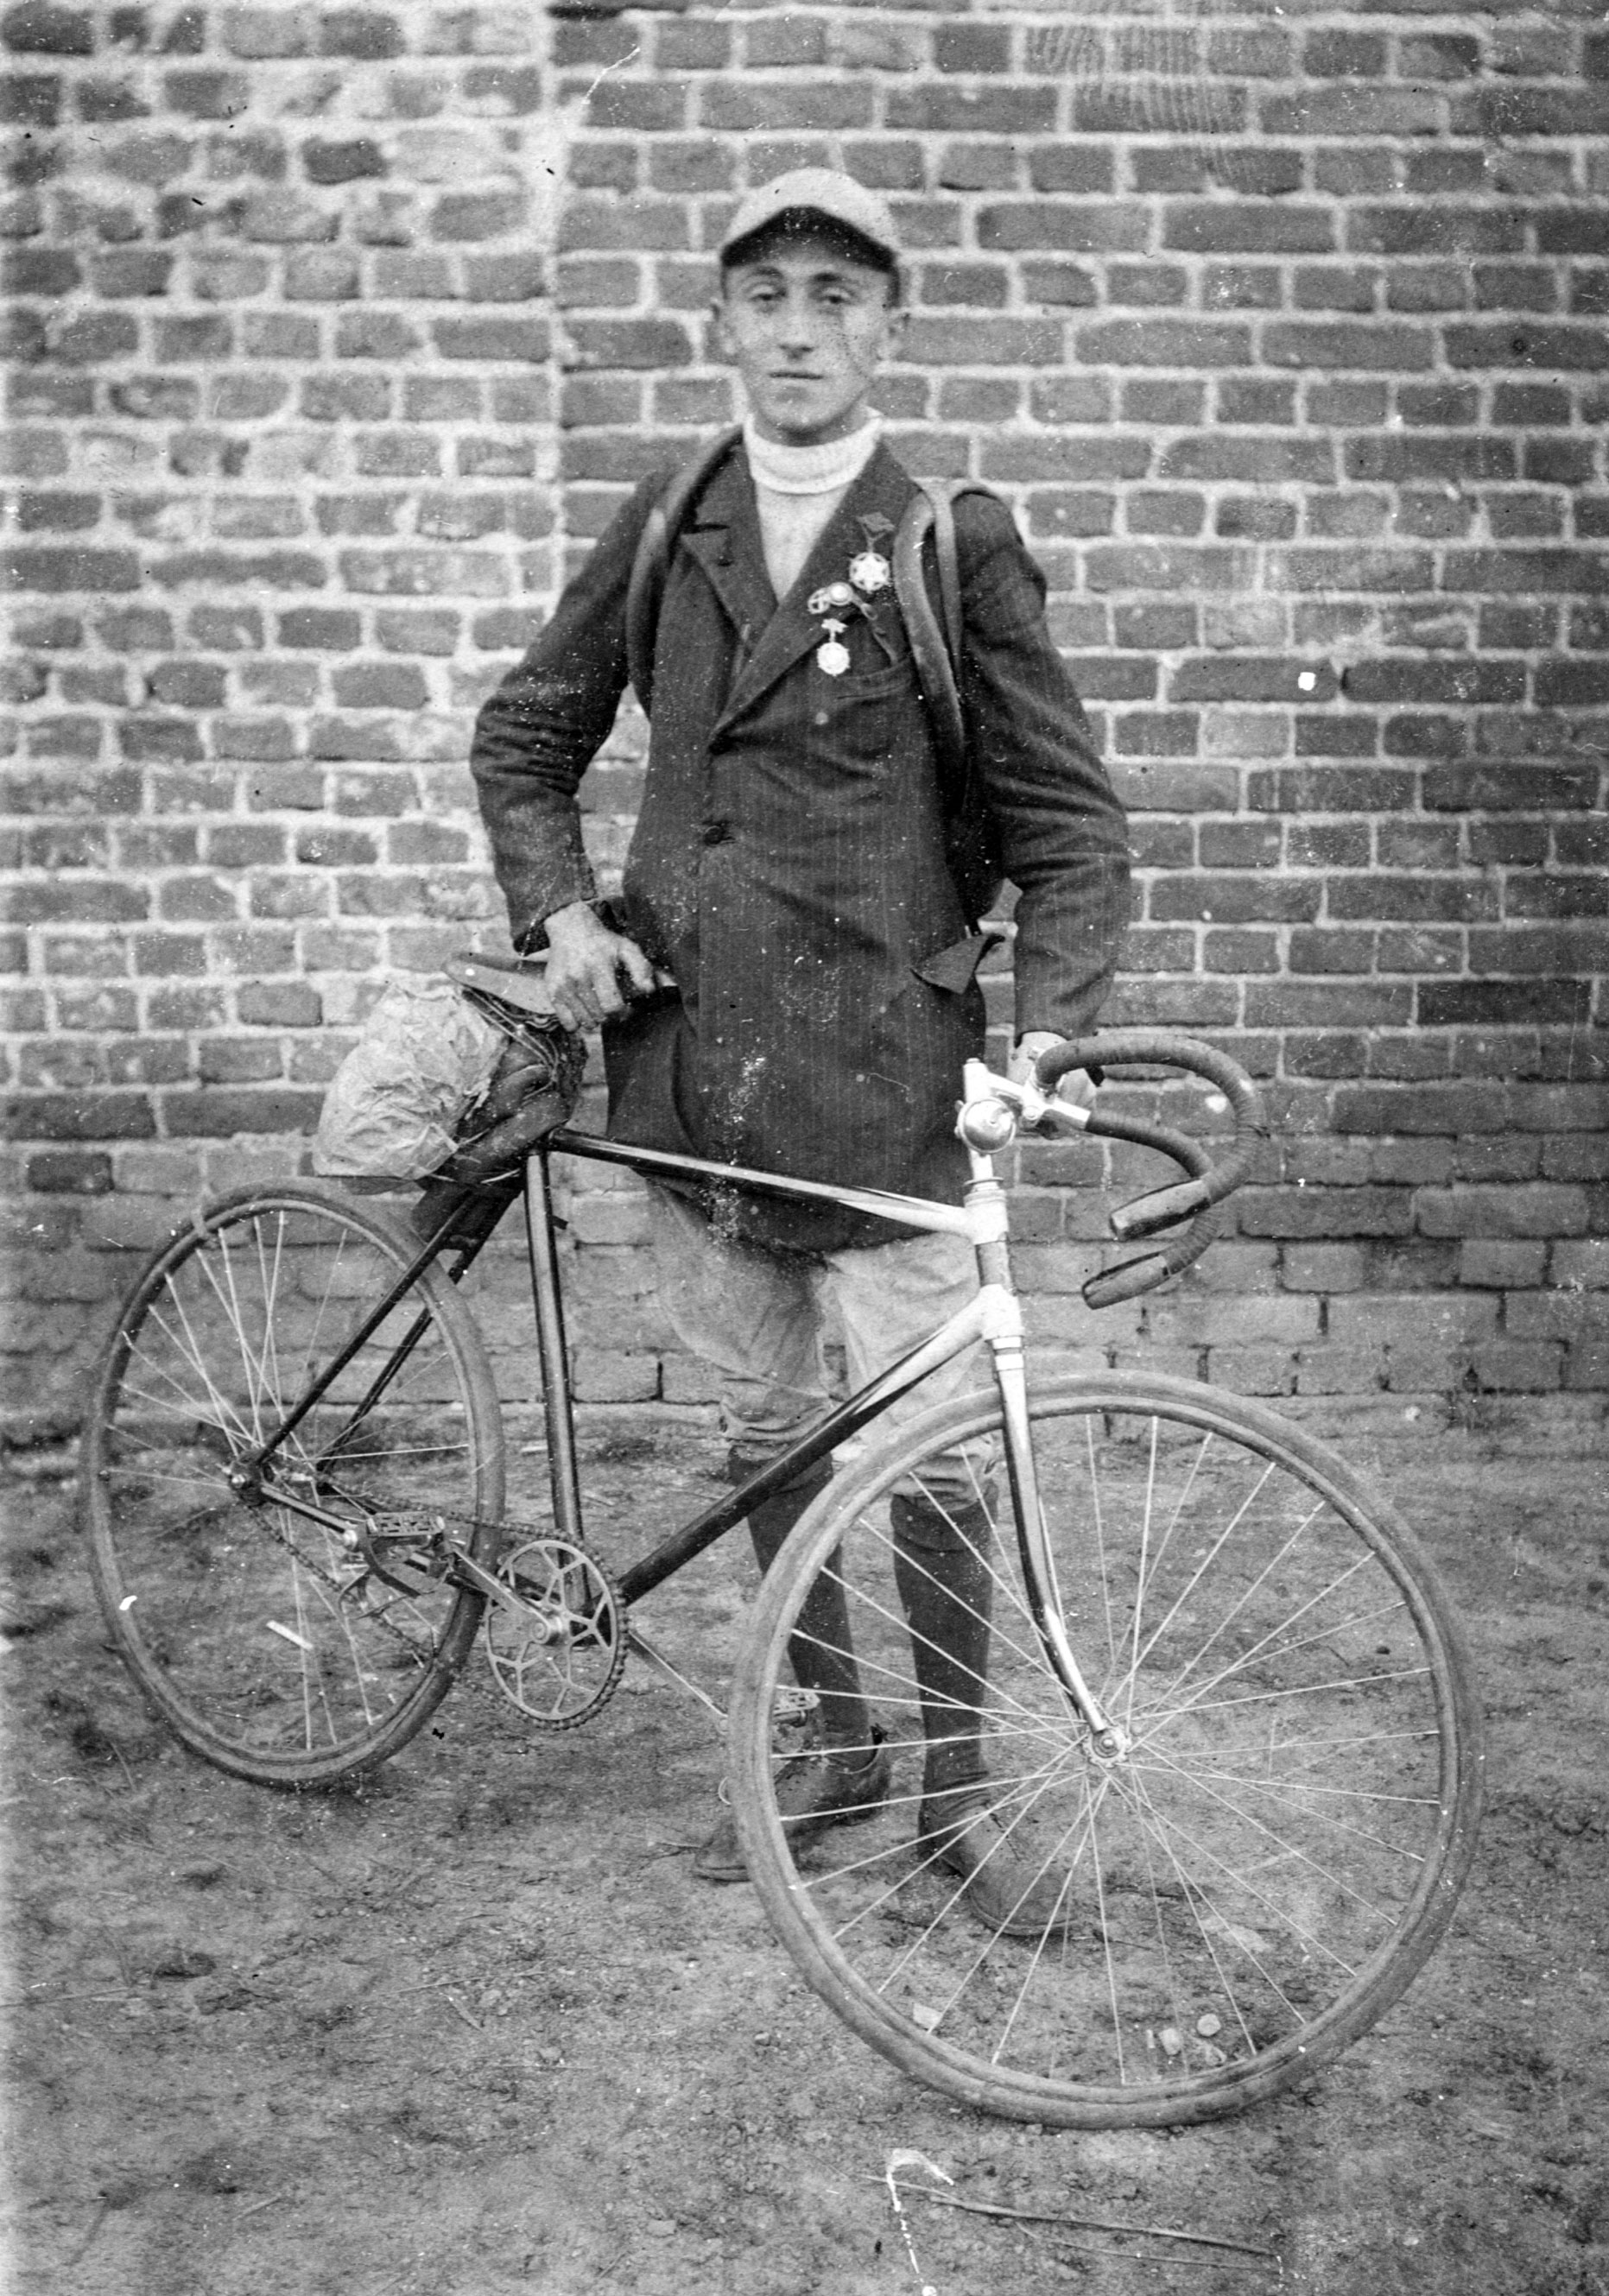 Moshe Cukierman, a member of the Bar Kojba sports club in Lodz, Poland beside his bicycle, early 1920s 